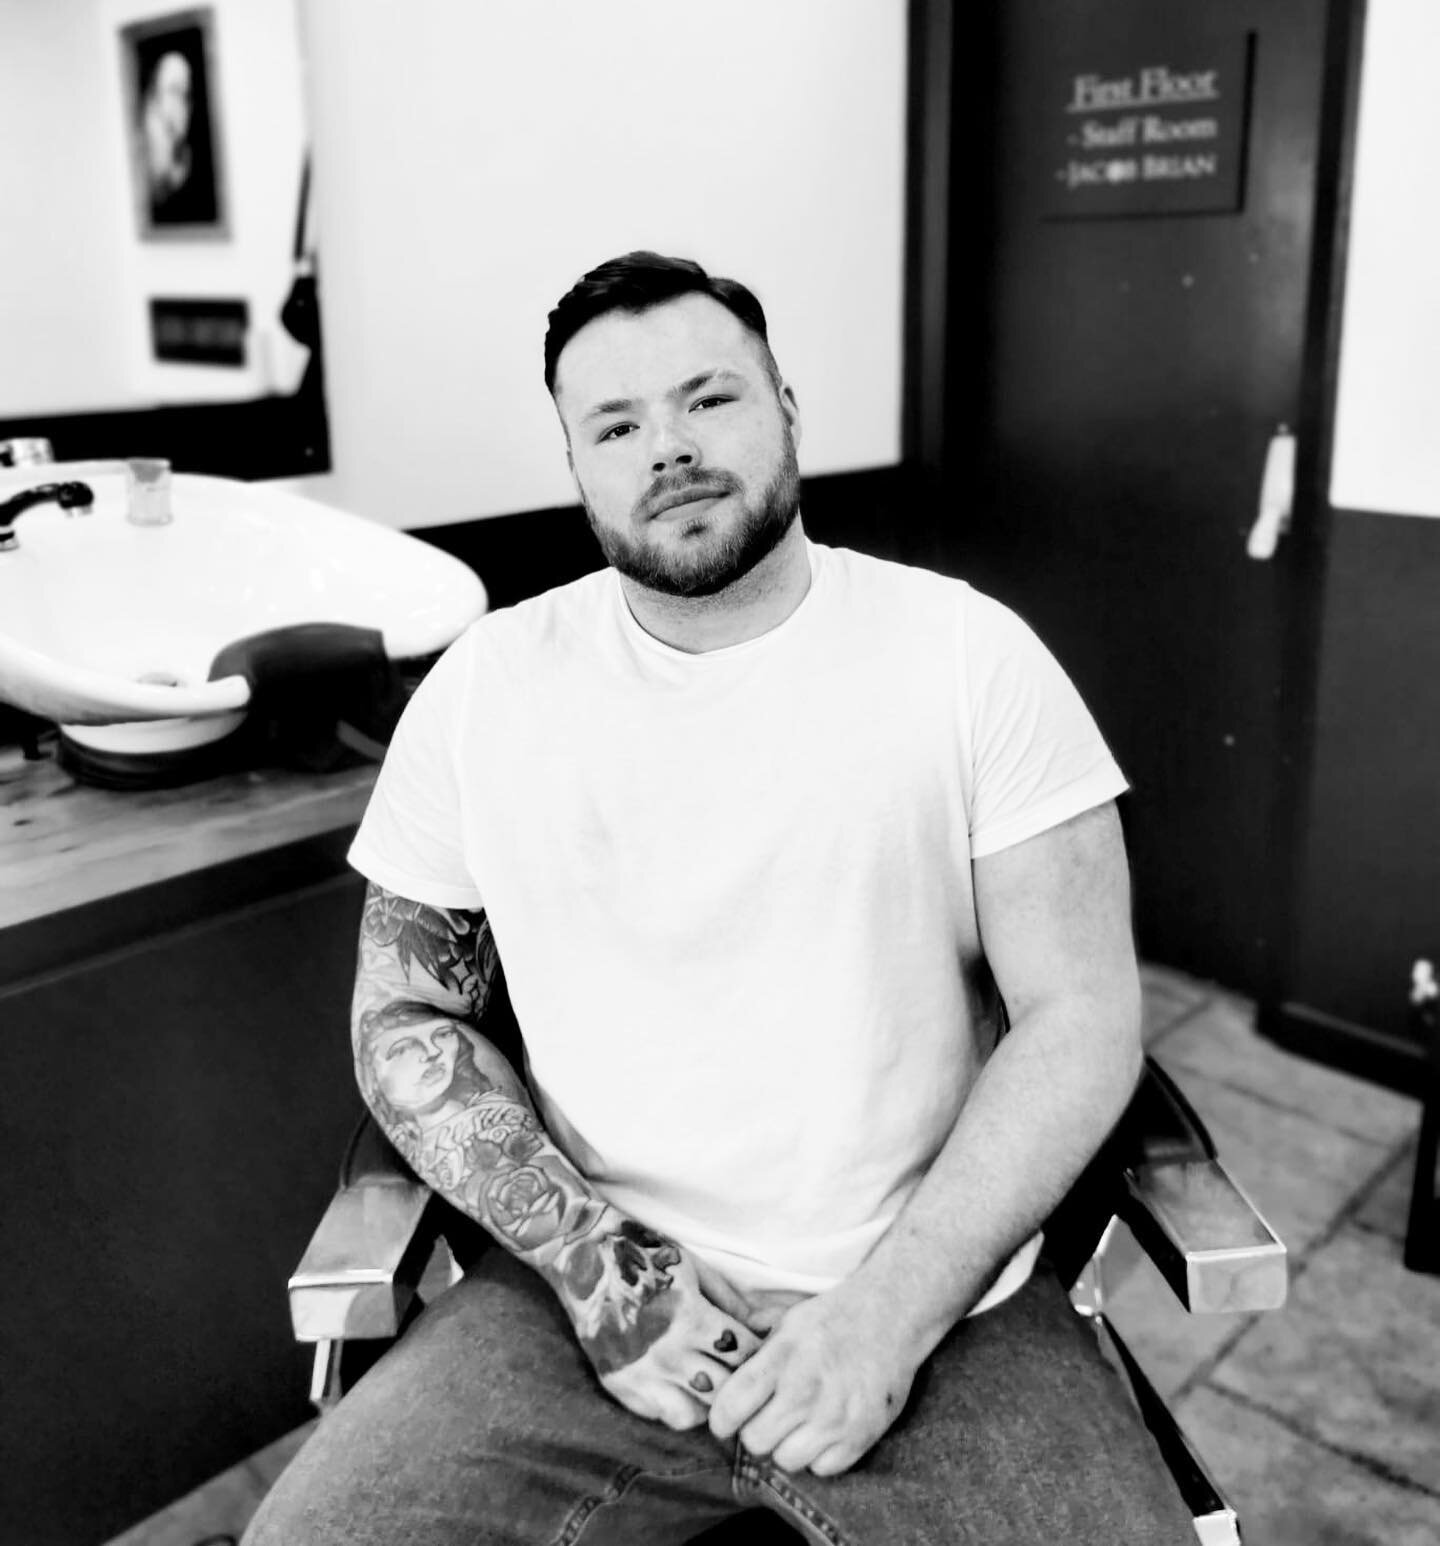 BORIS&amp;CO. 

💈 @jakeoneillukbarber 

You can find JAKE working in our Leeds shop. Check him out and visit @booksyuk to book your appointment.